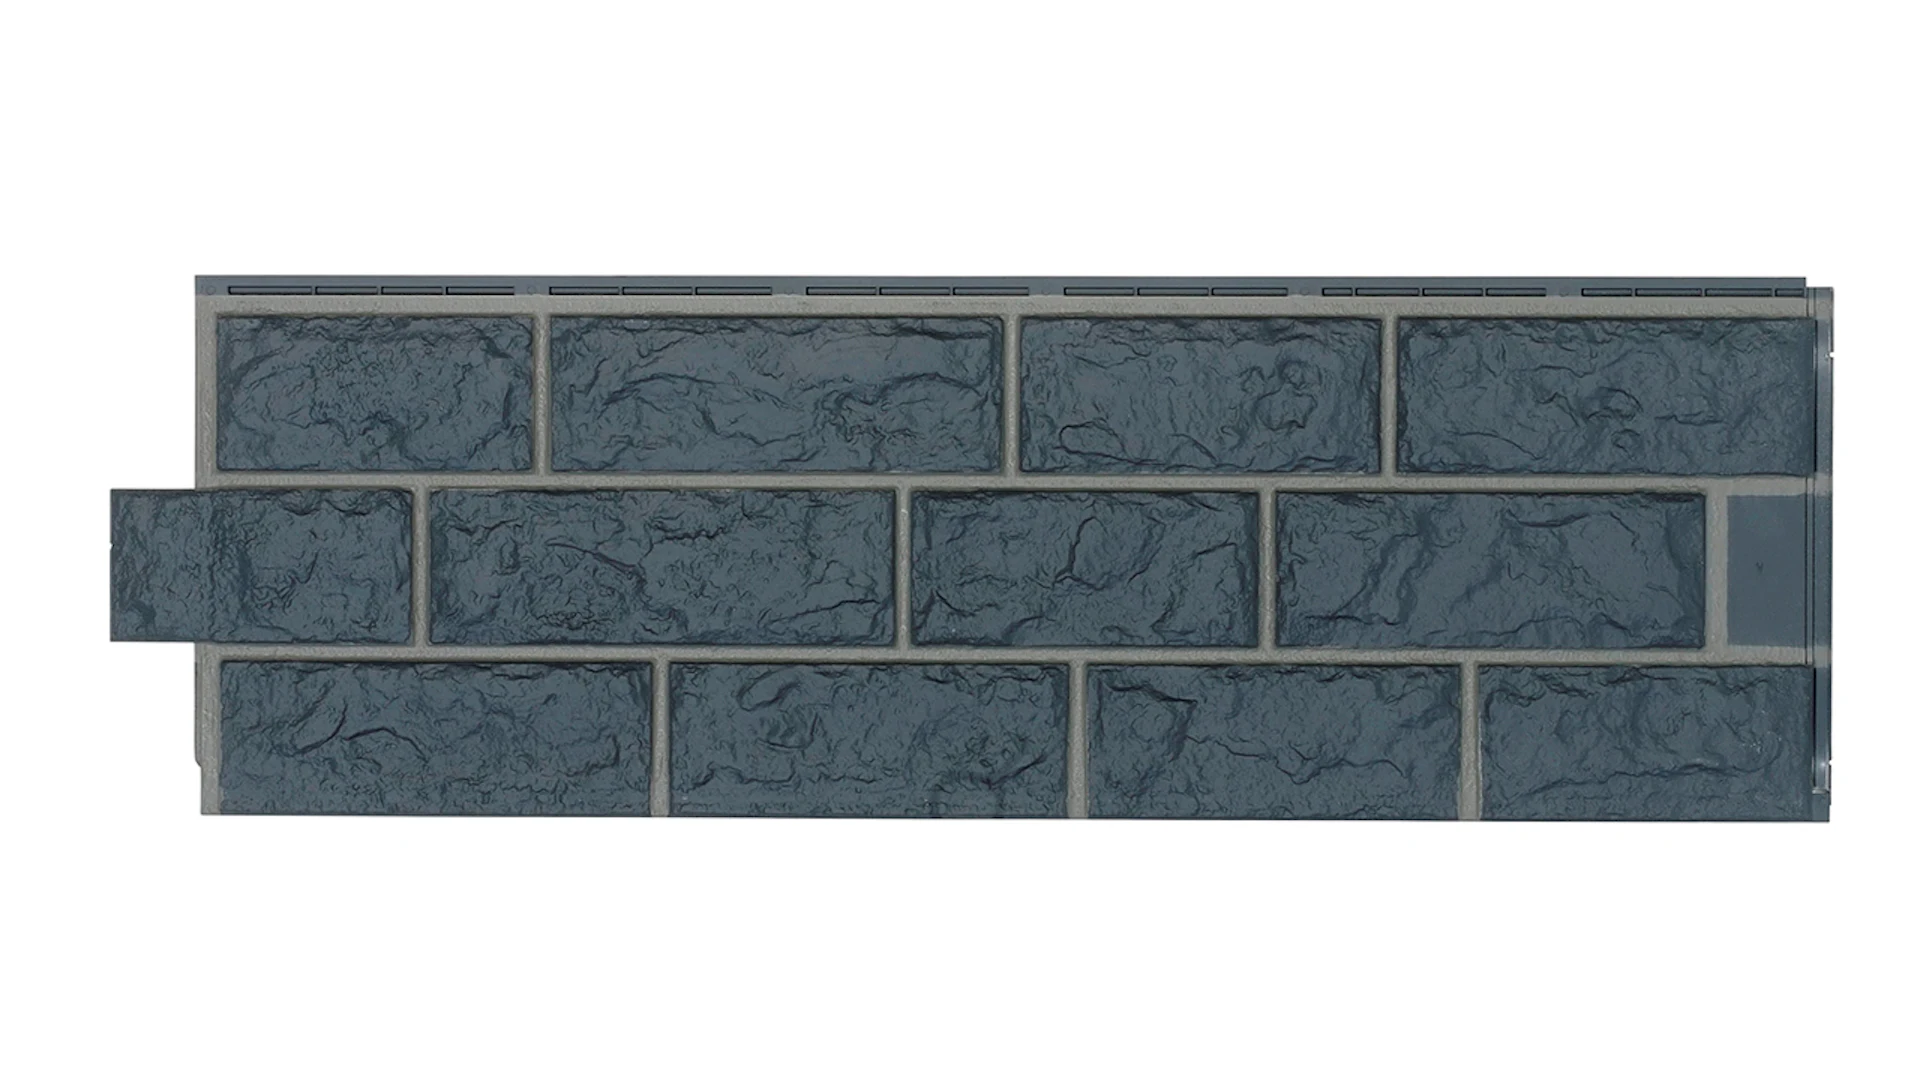 Zierer facade cladding clinker facing brick in quarry stone look BS1 - 1140 x 359 mm anthracite made of GRP